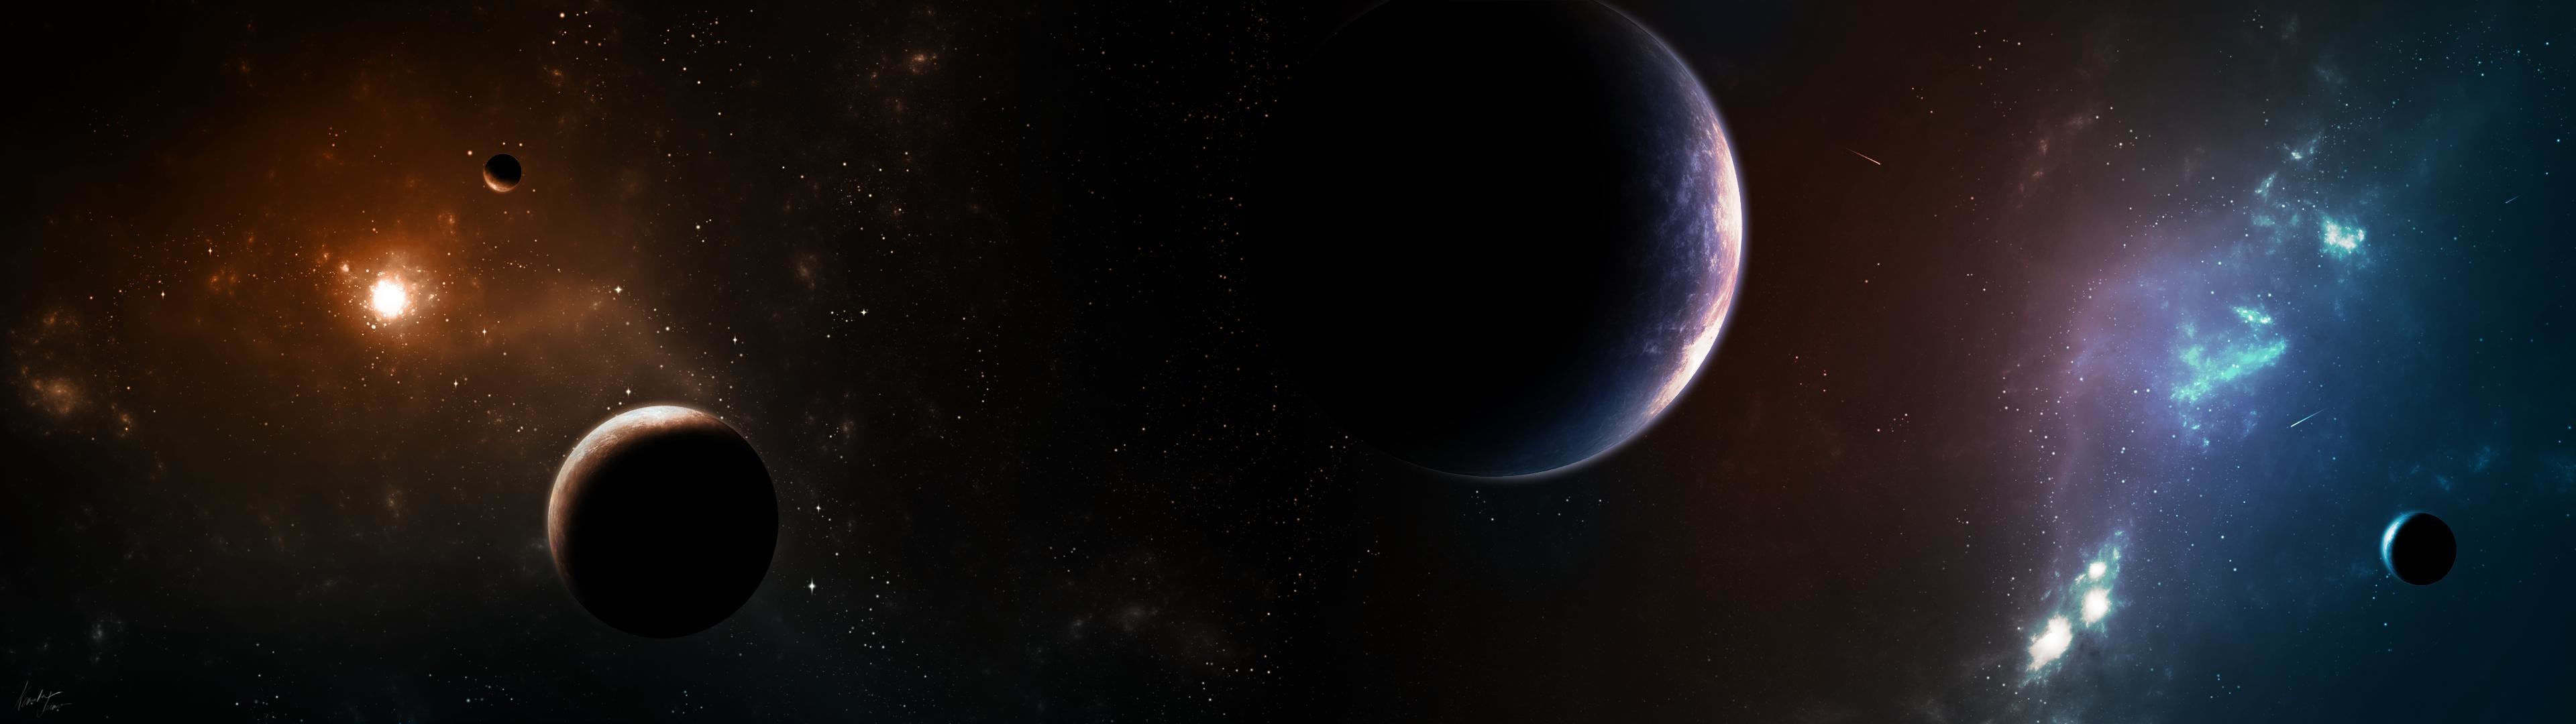 3840x1080 My updated dual monitor wallpaper collection - mostly space themed